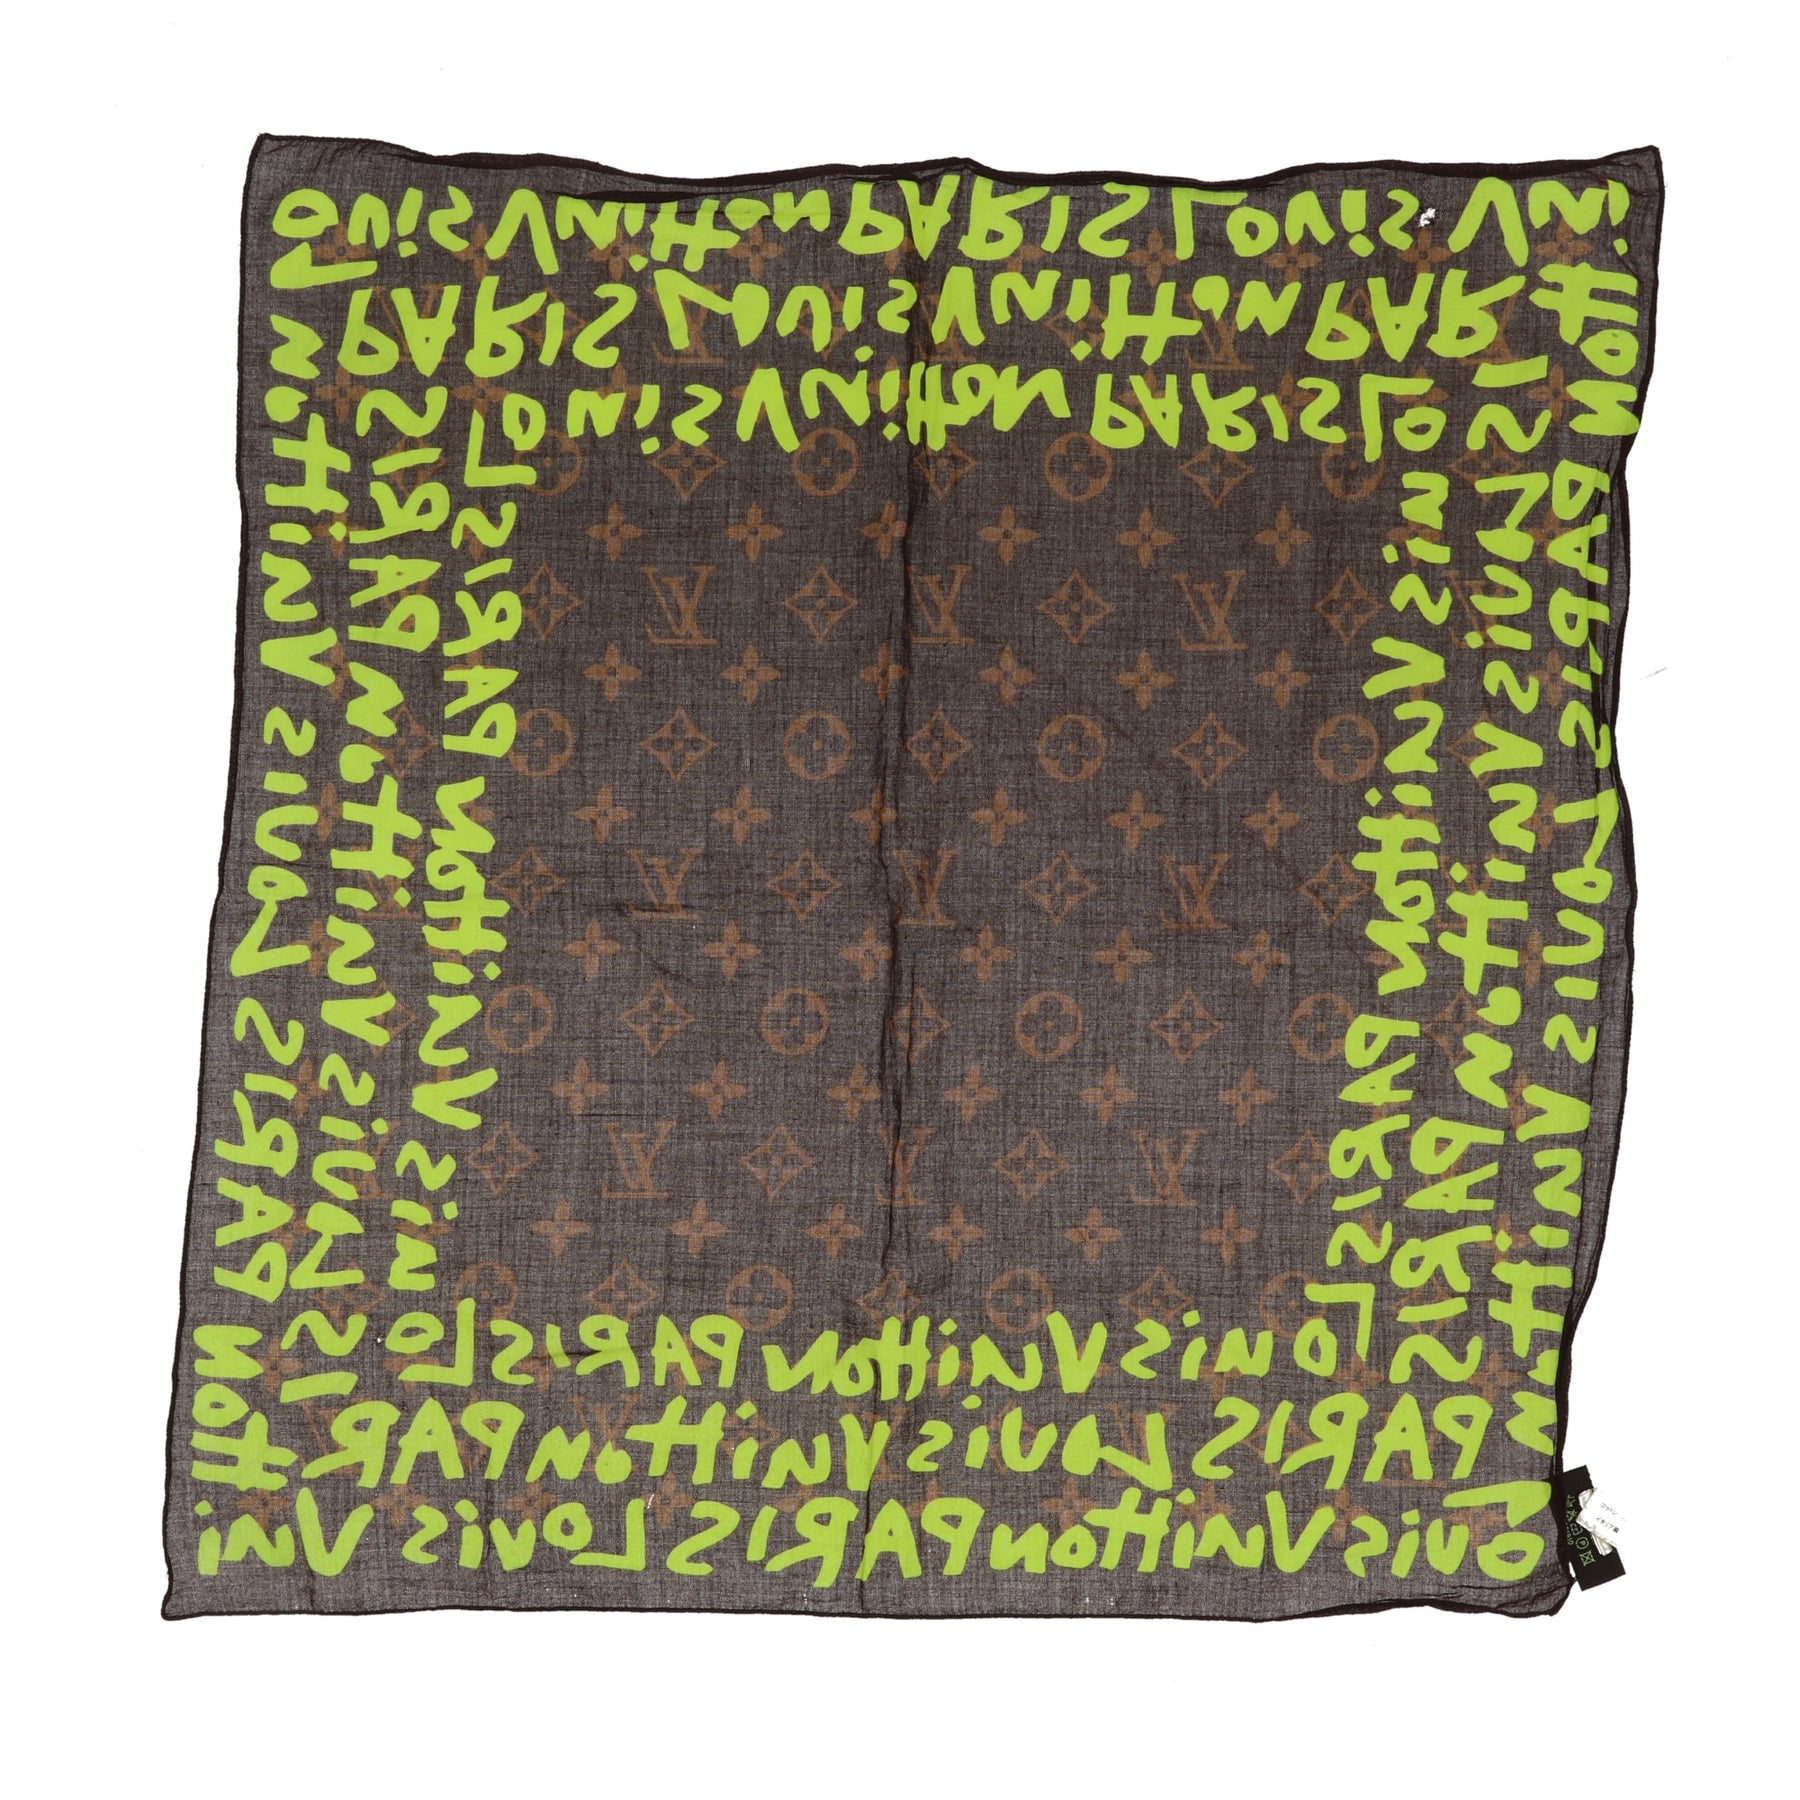 LIMITED EDITION LOUIS VUITTON STEPHEN SPROUSE GRAFFITI SCARF